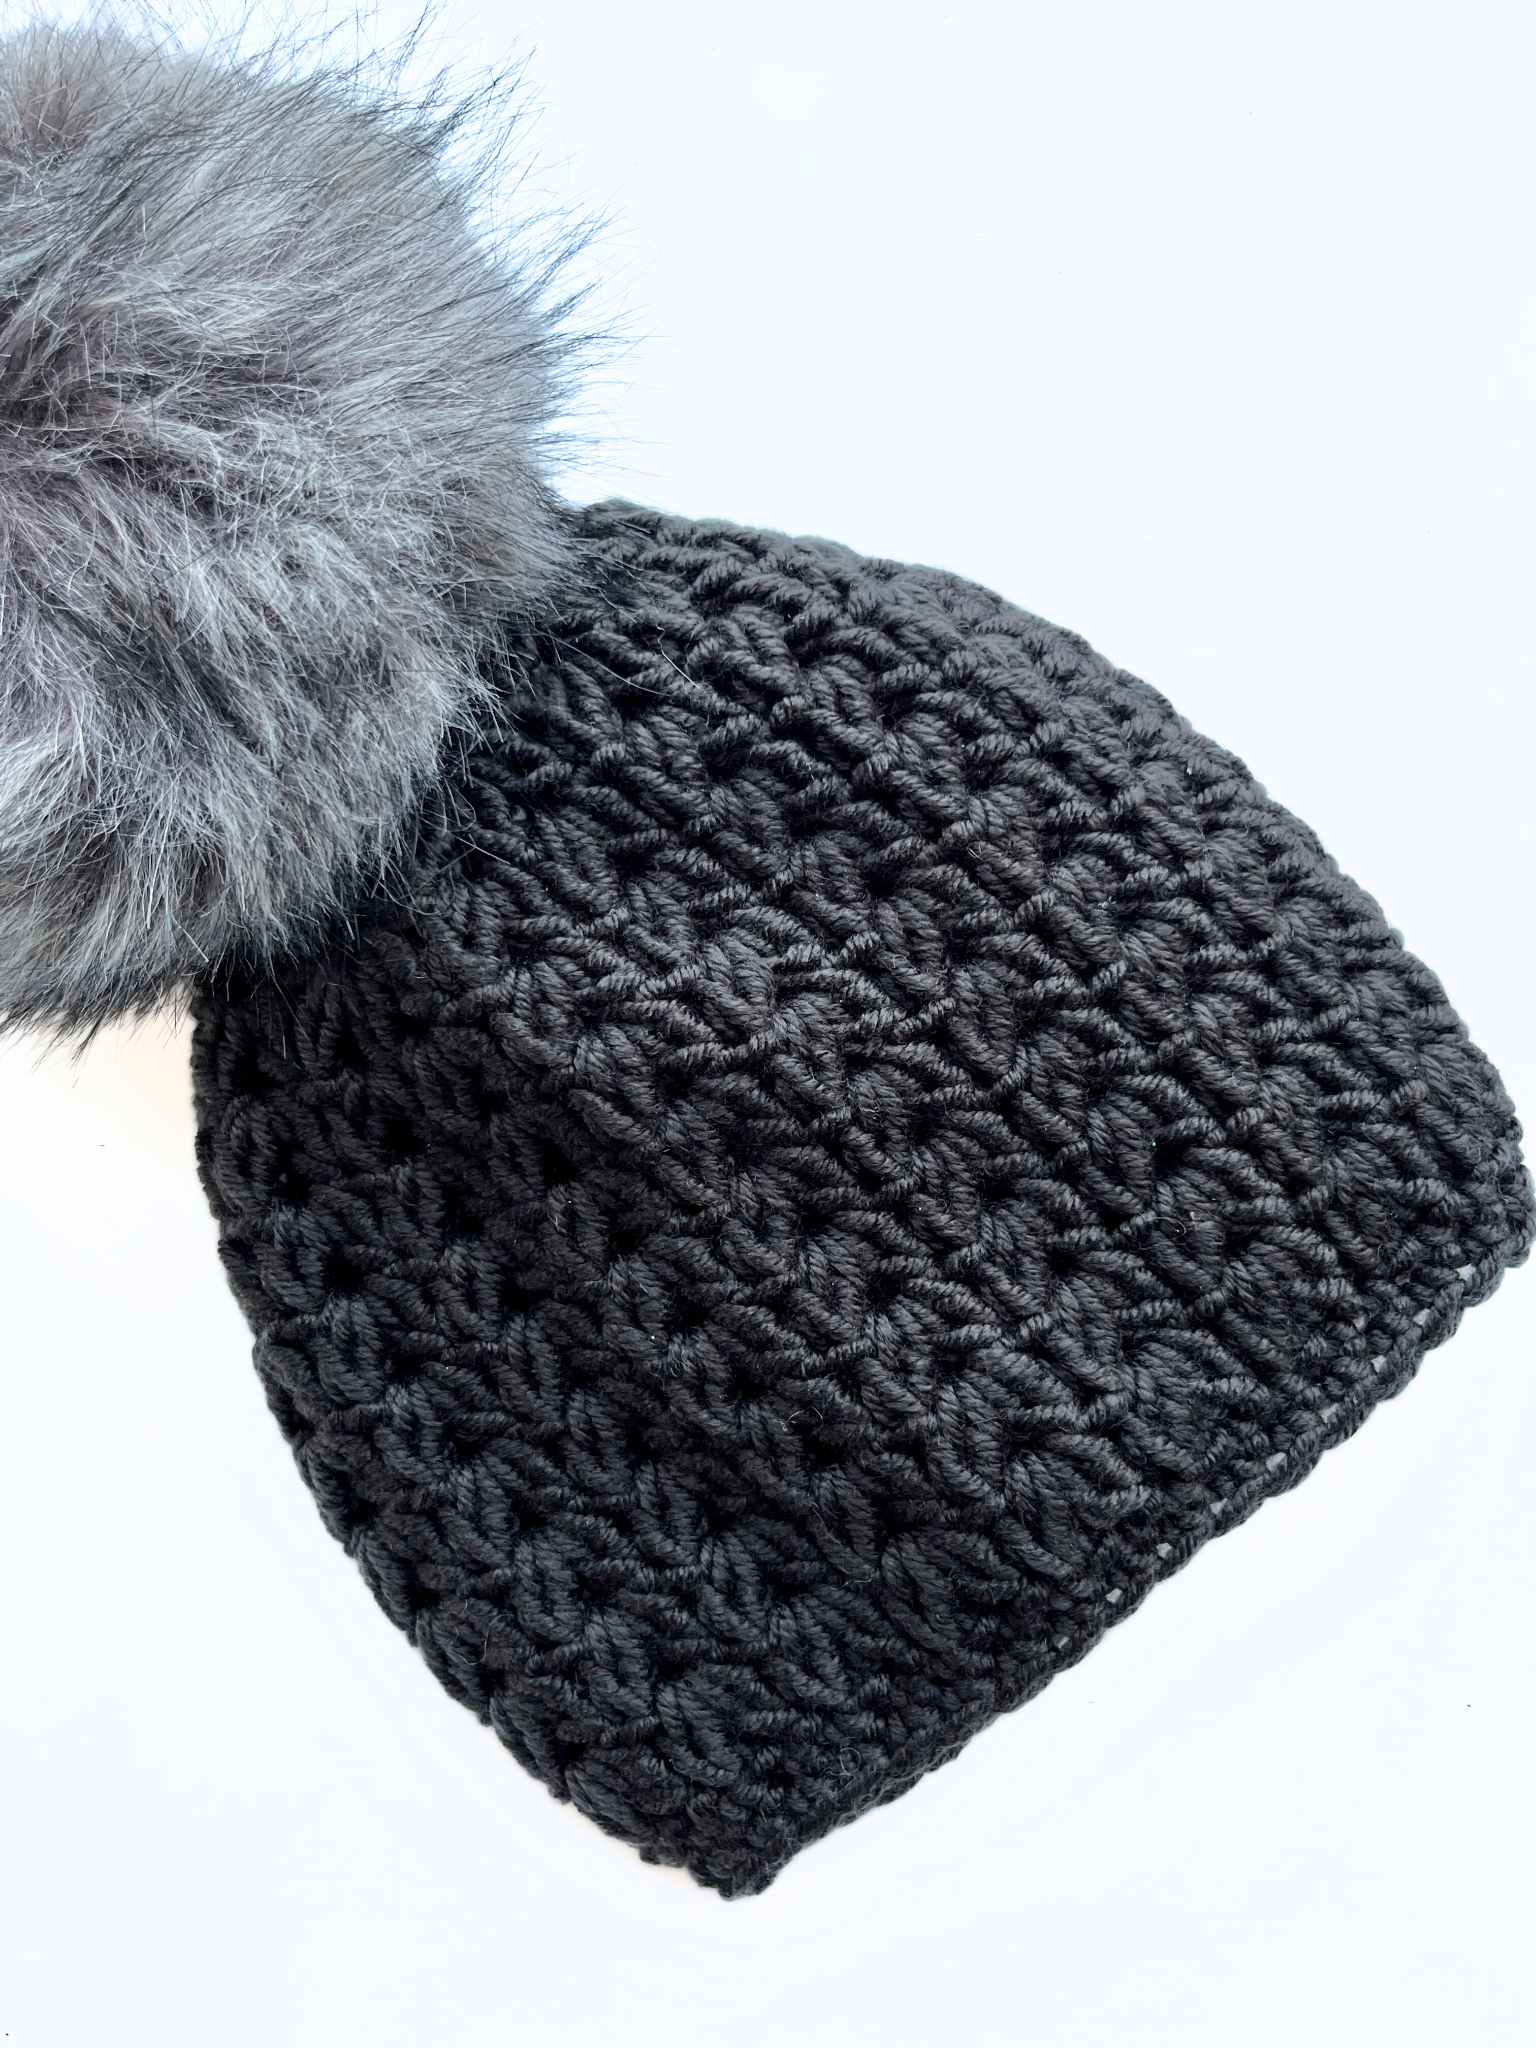 dark gray crocheted hat with a pom pom on the top